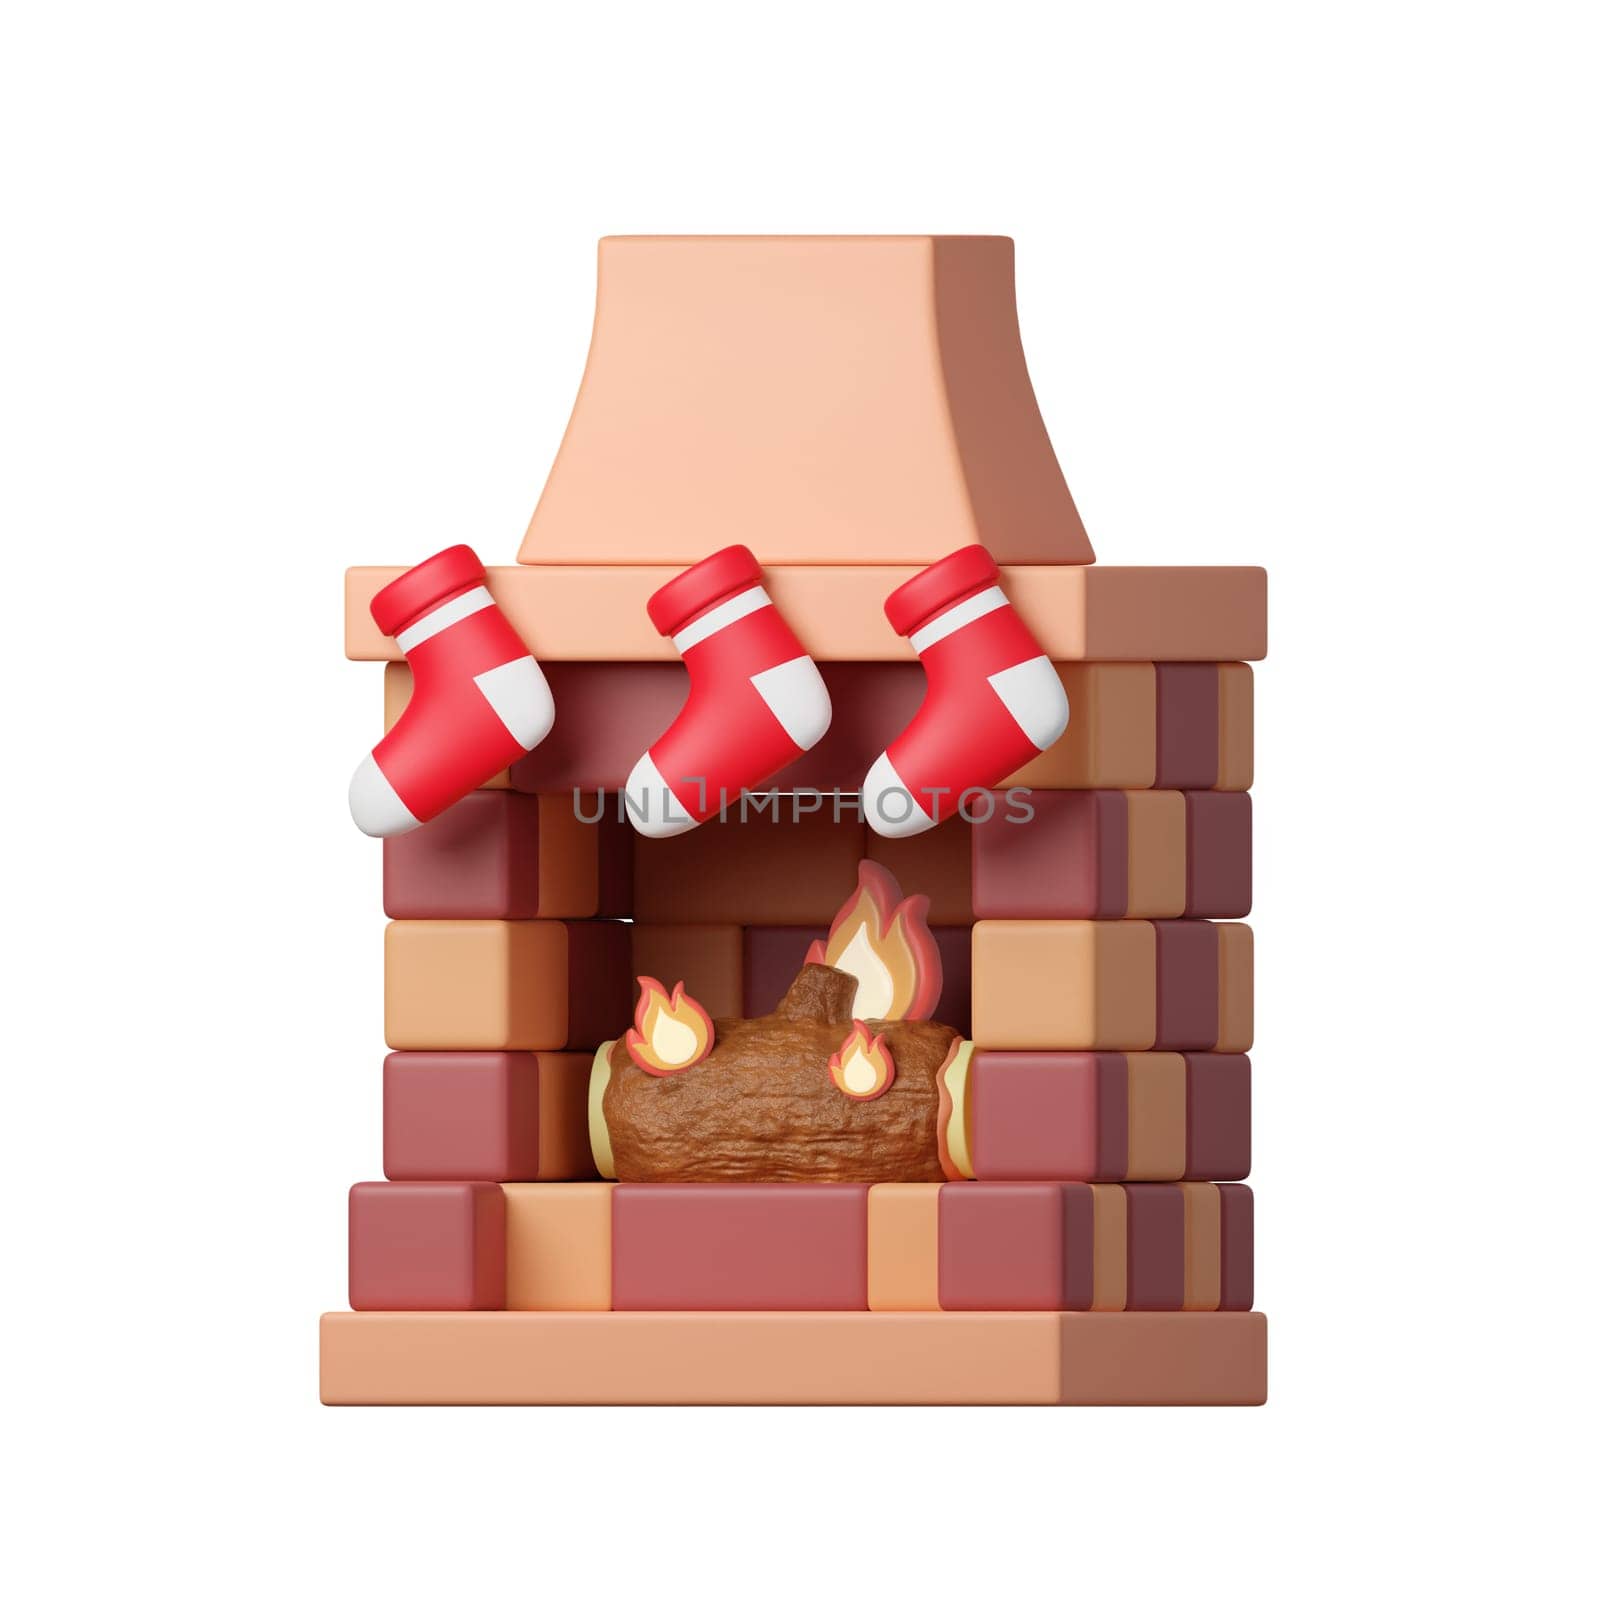 3d Christmas fireplace icon. minimal decorative festive conical shape tree. New Year's holiday decor. 3d design element In cartoon style. Icon isolated on white background. 3d illustration.